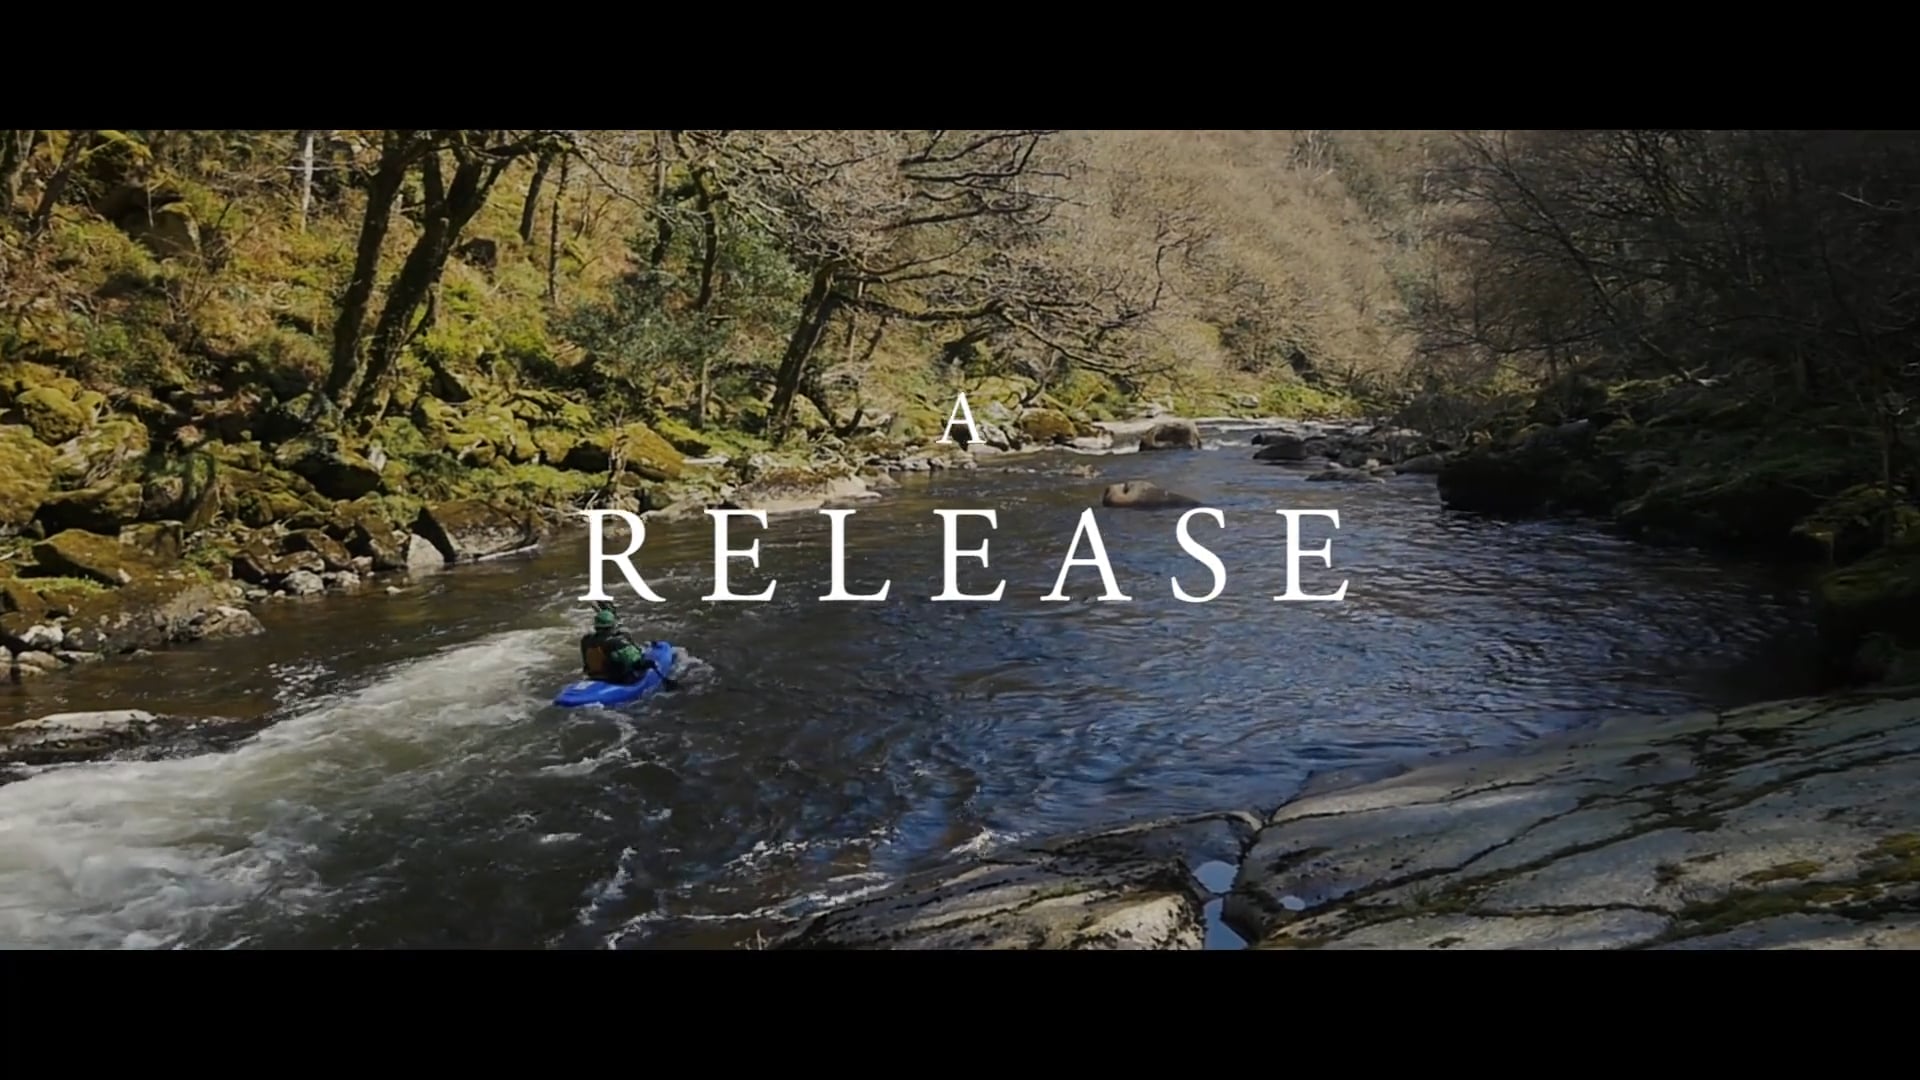 A Release